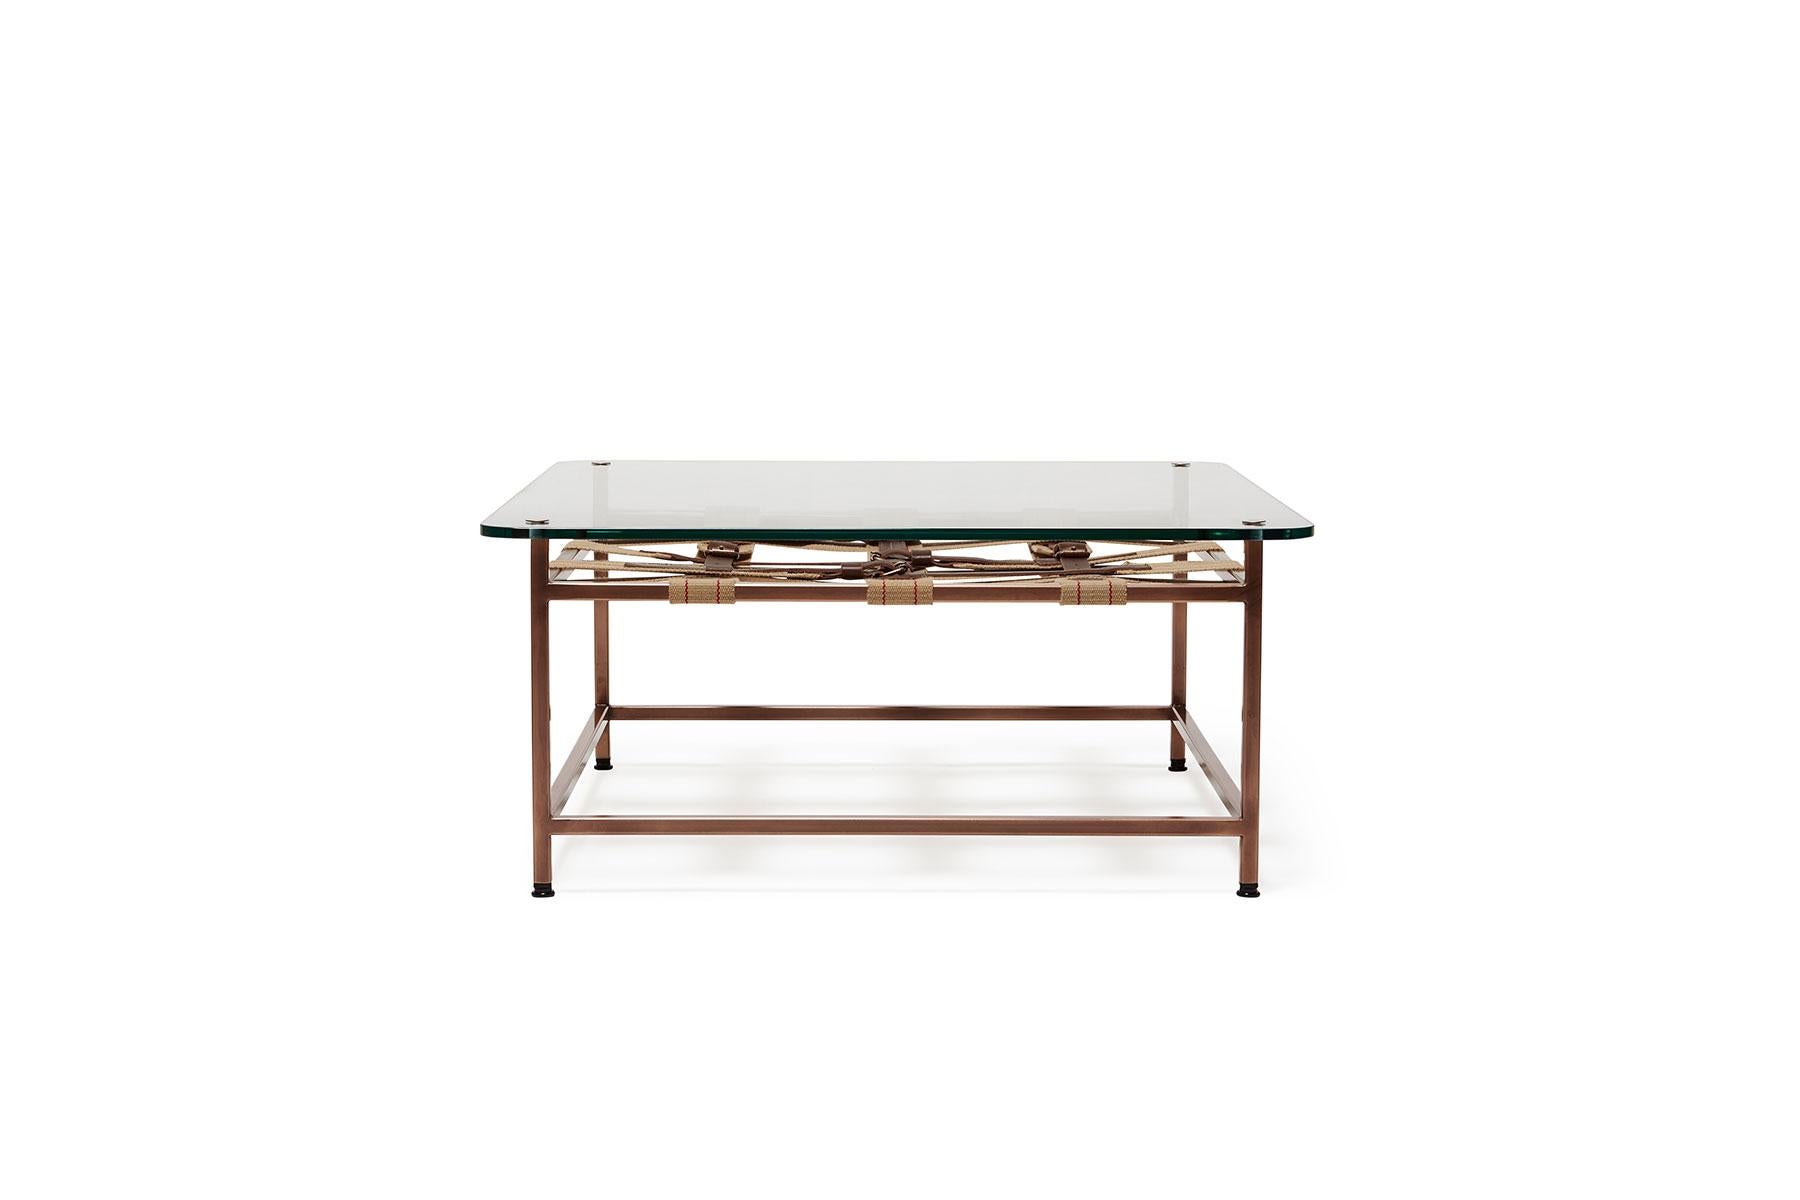 This glass-topped coffee table utilizes the signature belts from the Stephen Kenn Inheritance Collection stretched across an antique copper-plated steel frame. The belts are a replica of a WWII Swiss army 